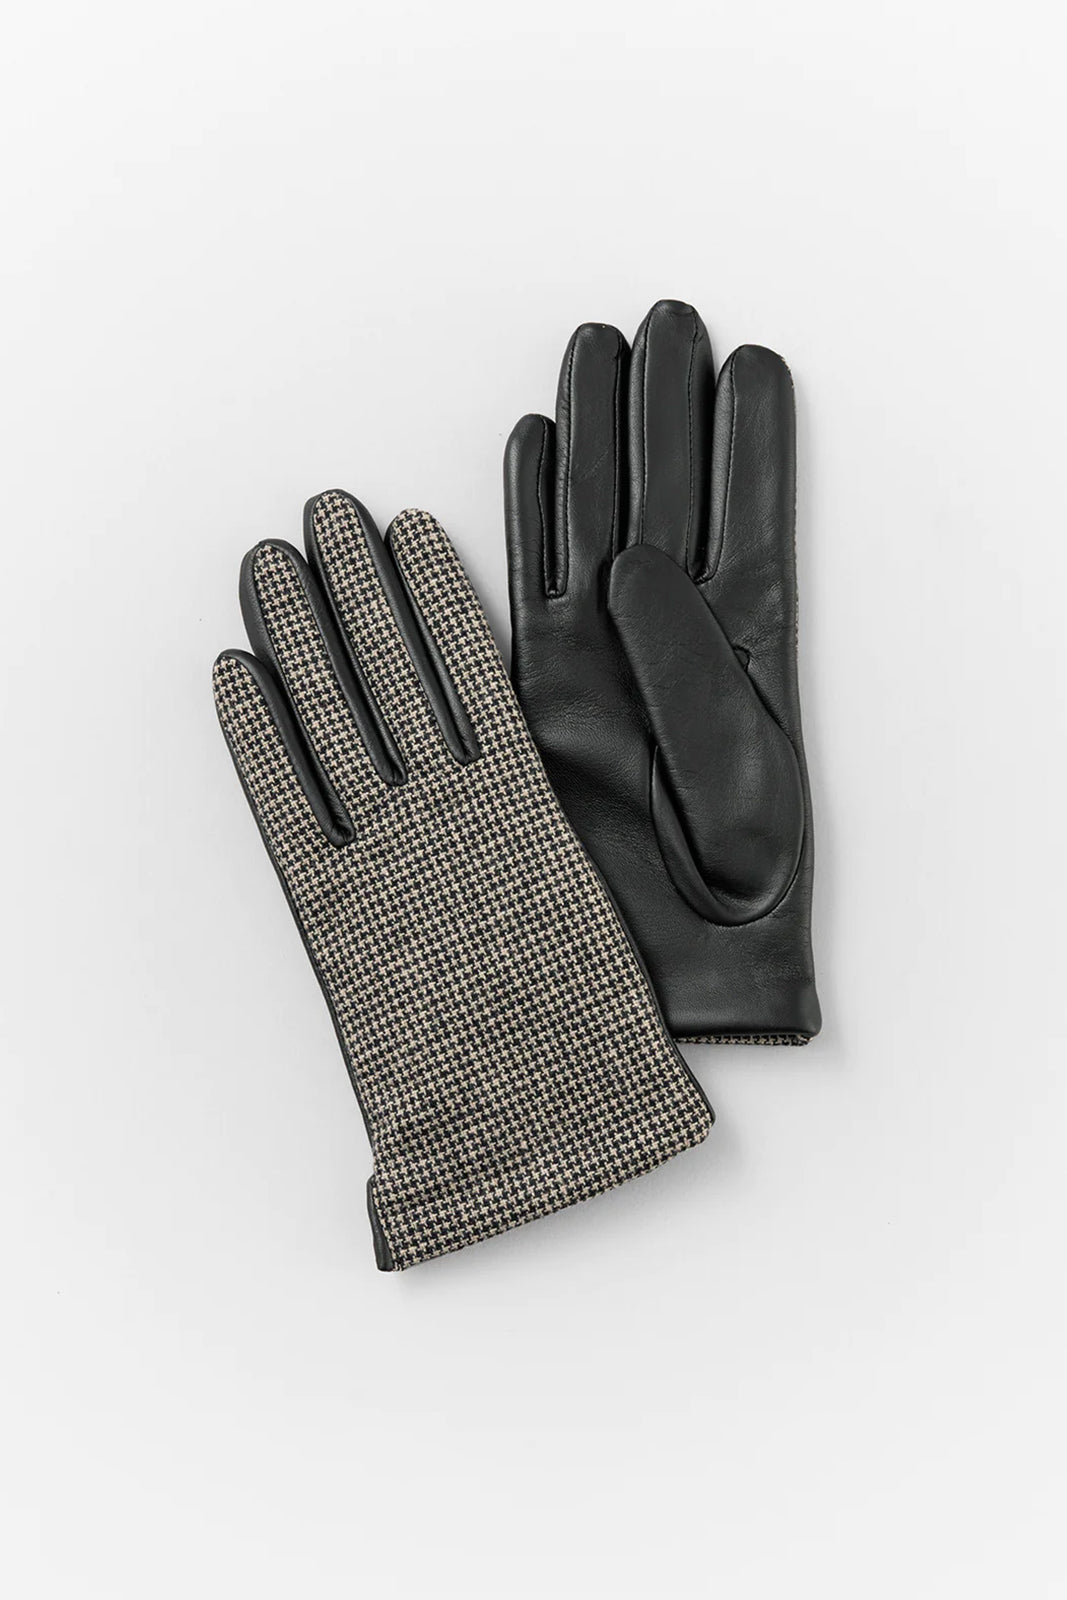 Arts-and-Science-combi-glove-black-amarees